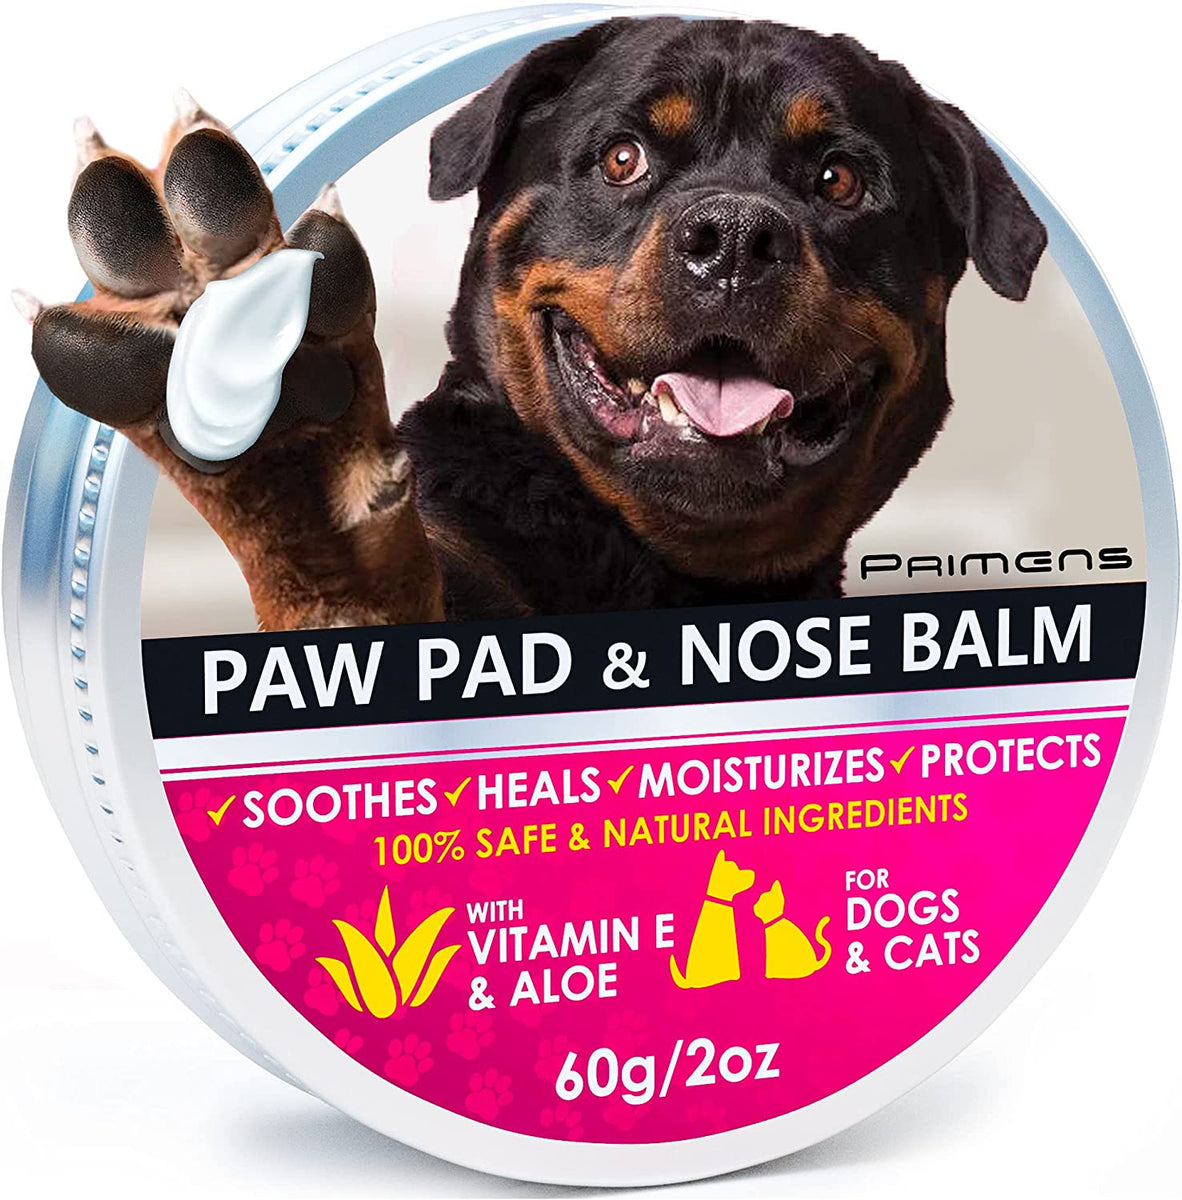 Natural Dog Paw Balm, Dog Paw Protection for Hot Pavement, Dog Paw Wax –  Primens Store